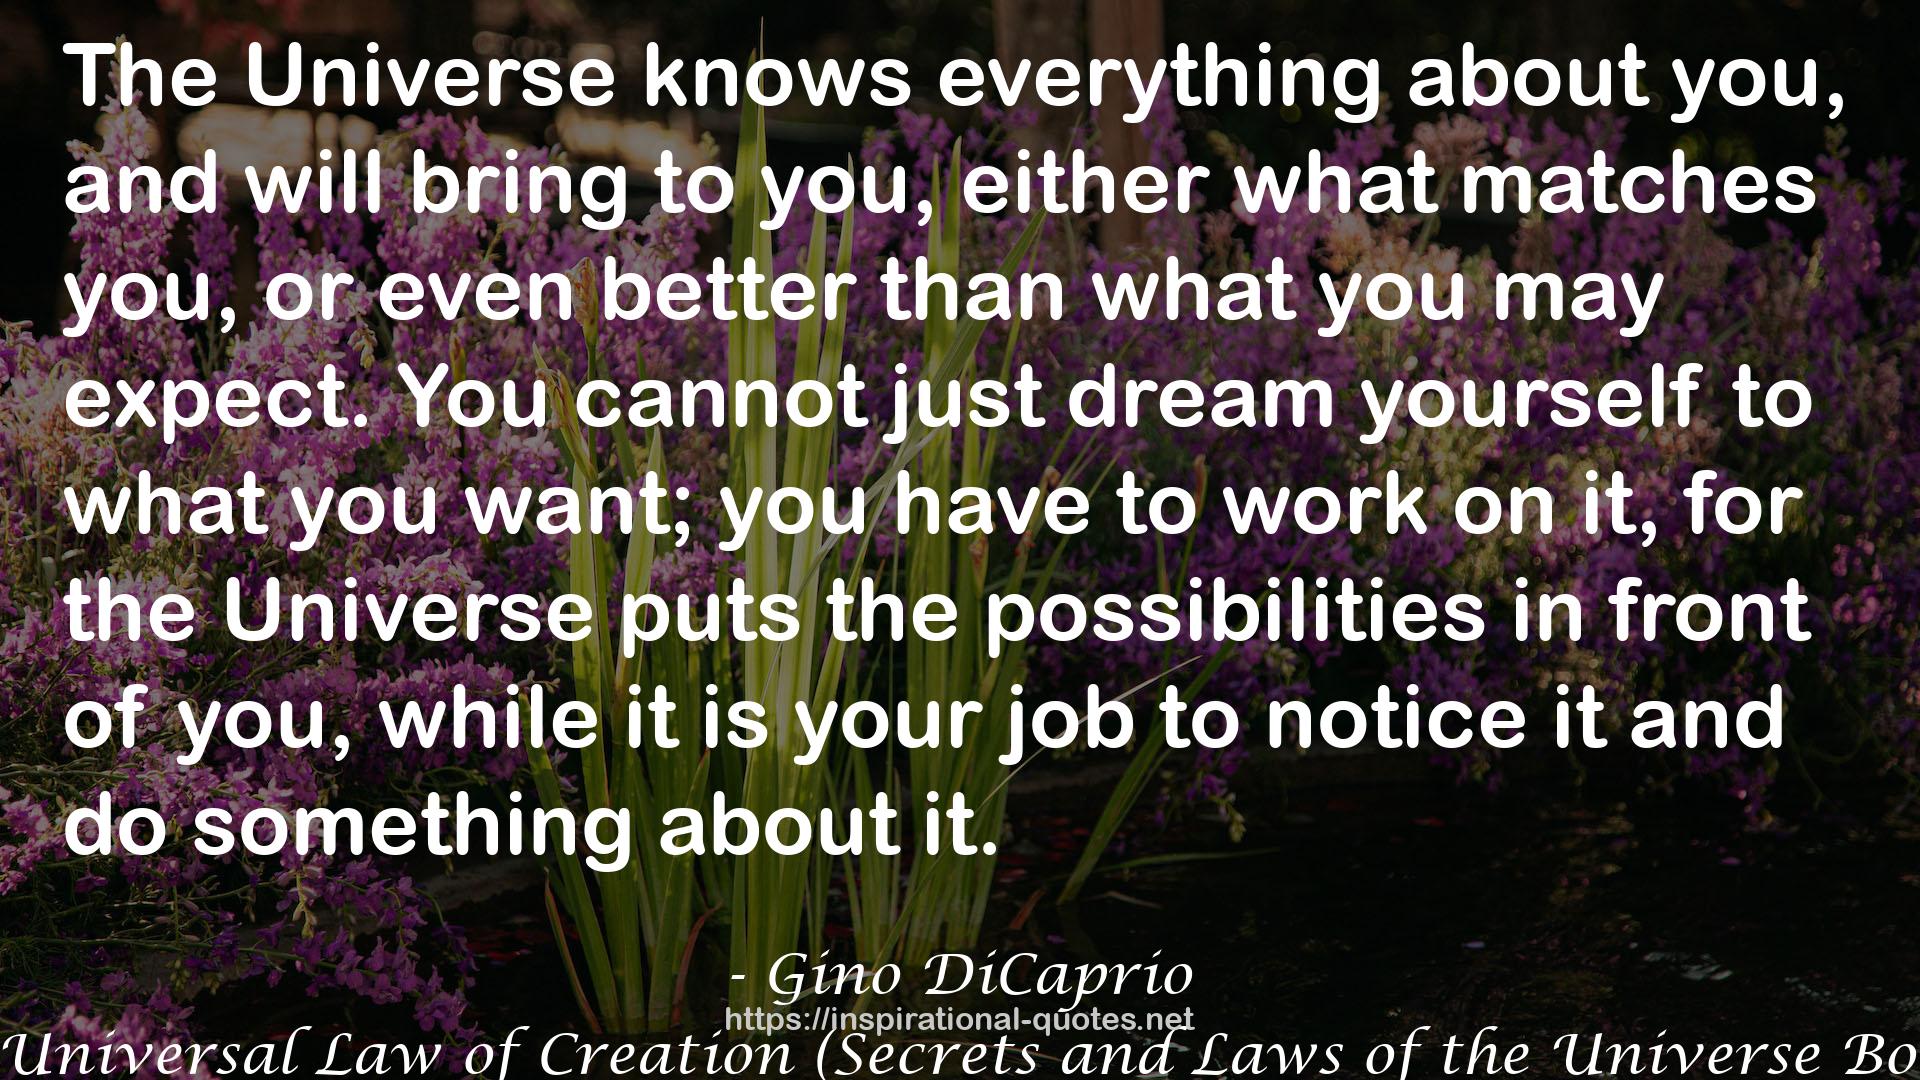 The Universal Law of Creation (Secrets and Laws of the Universe Book 1) QUOTES